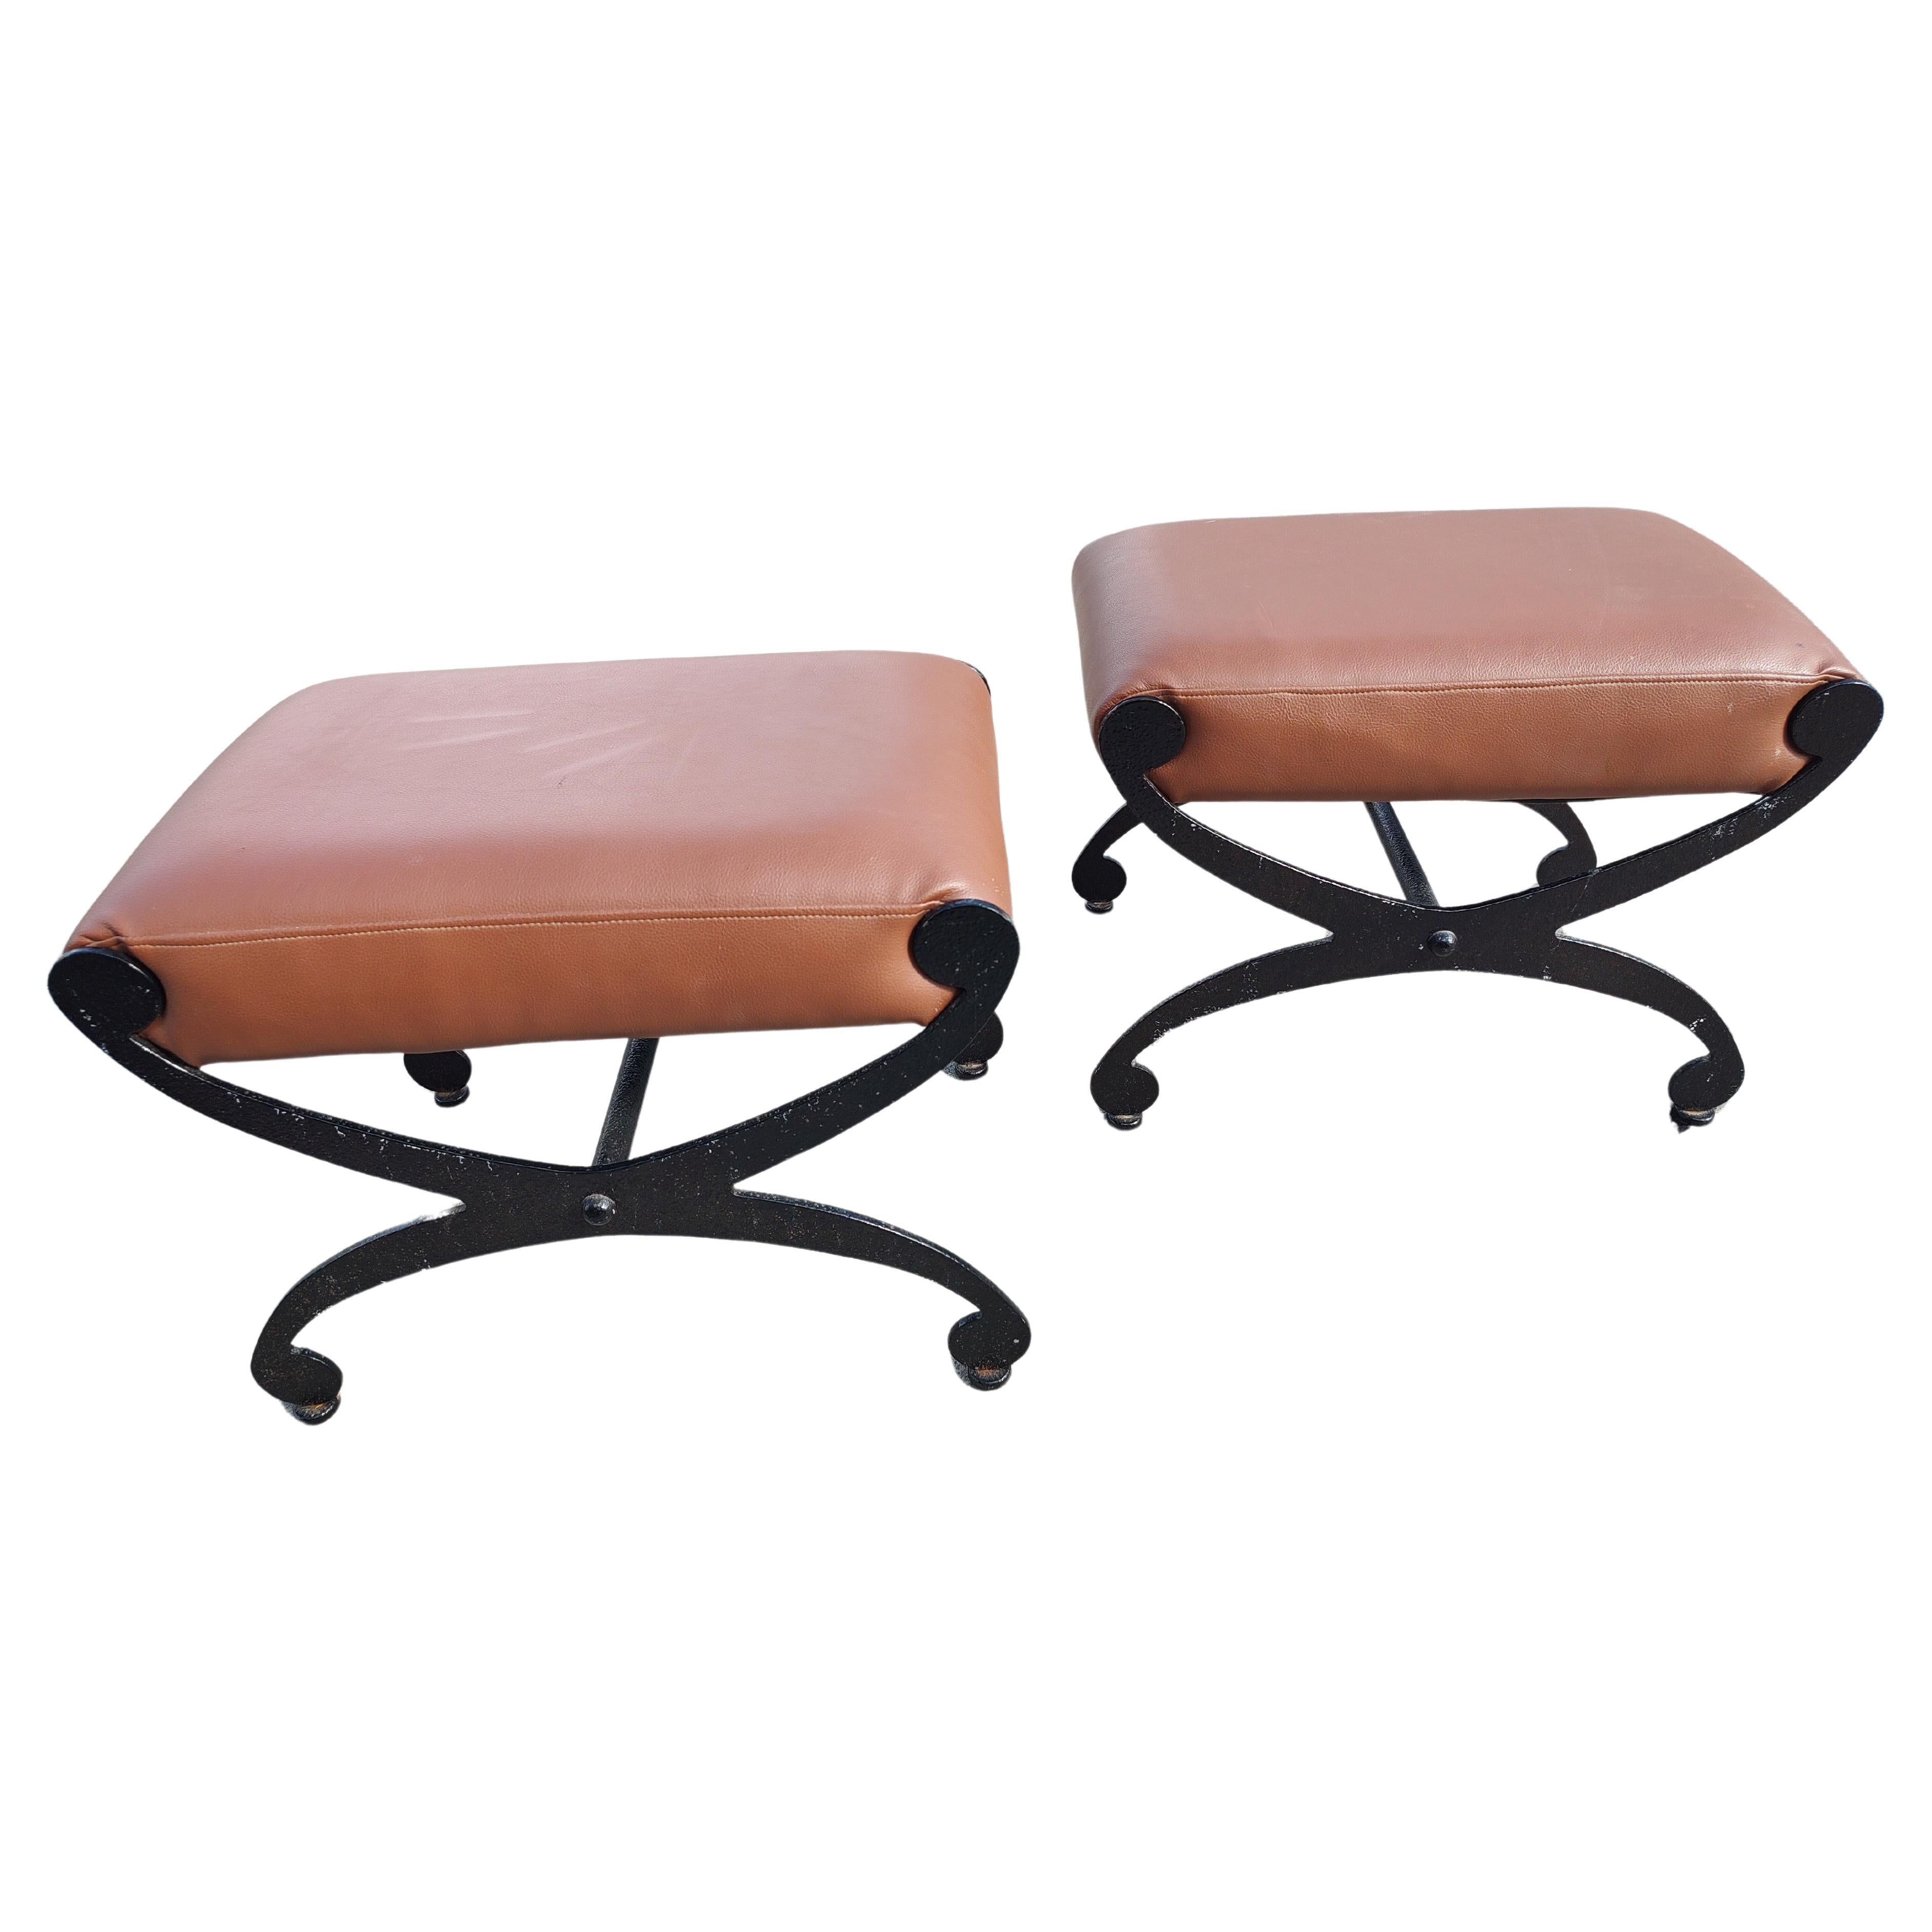 Pair of Mid Century Modern Cast Iron with Brown Naughahyde Ottomans  For Sale